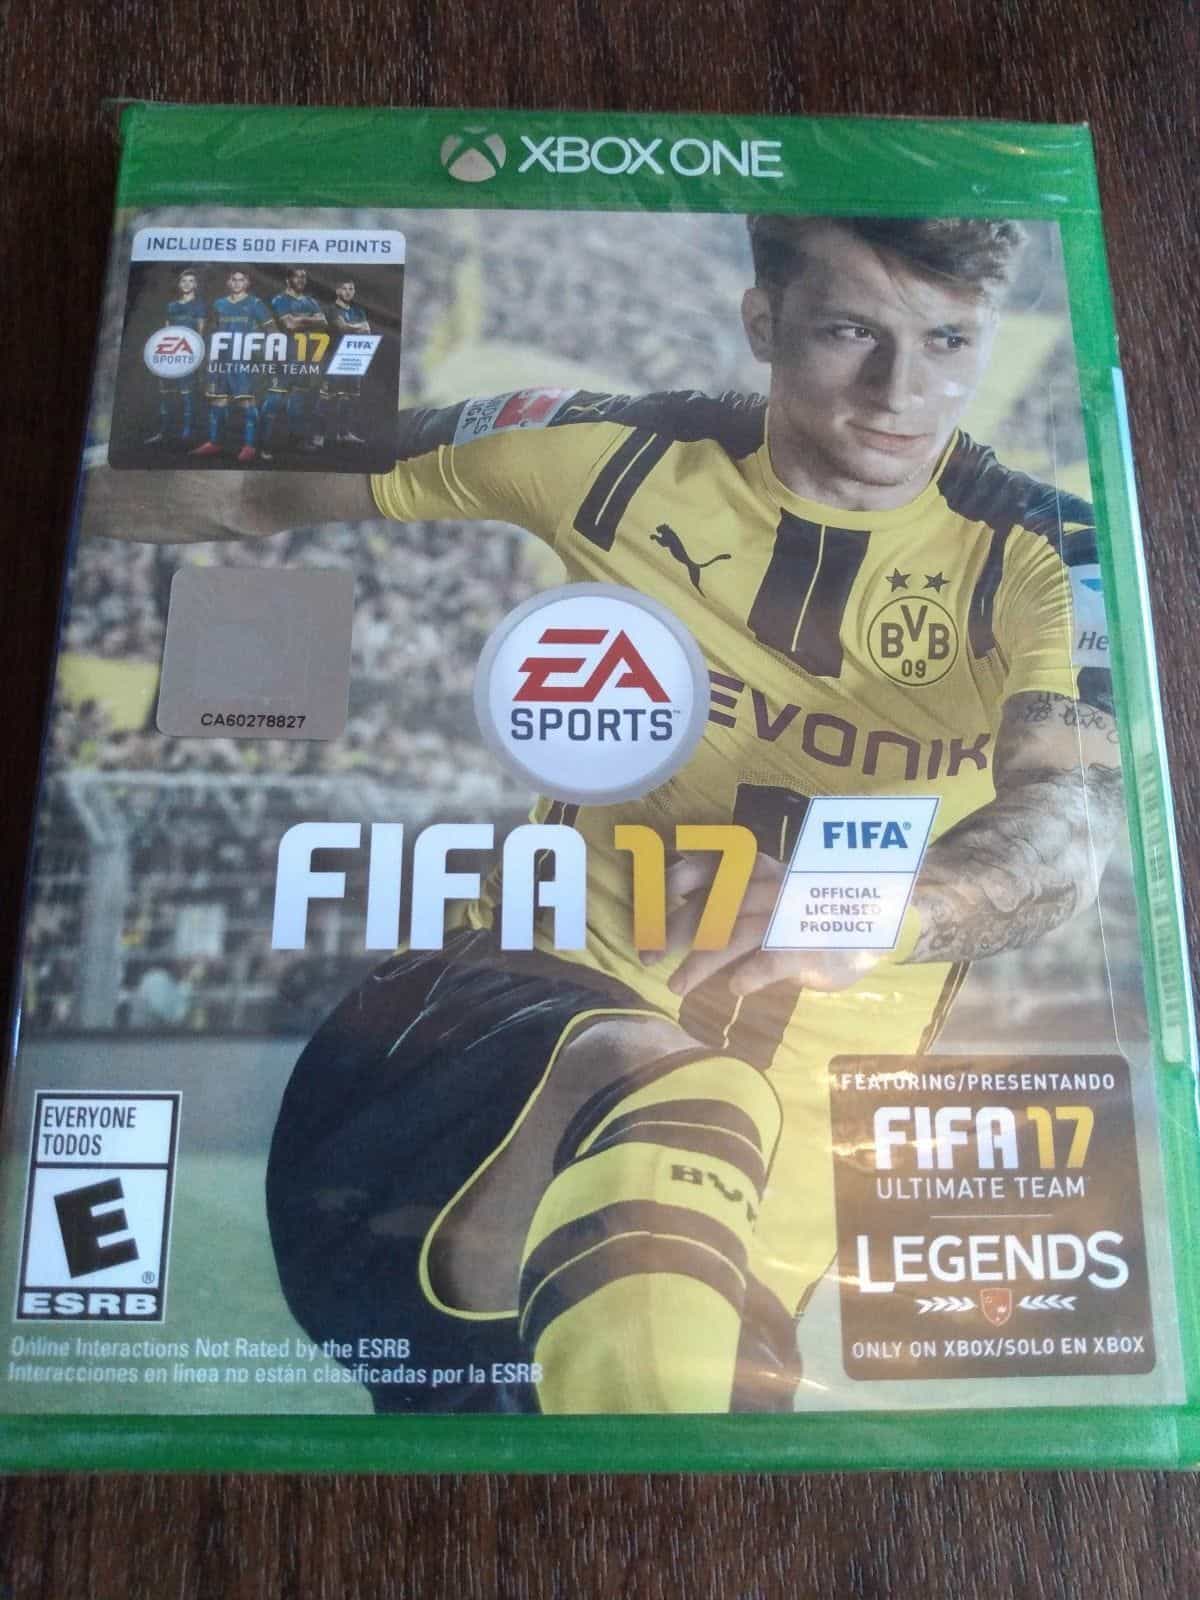 FIFA 17 Xbox One game – sealed